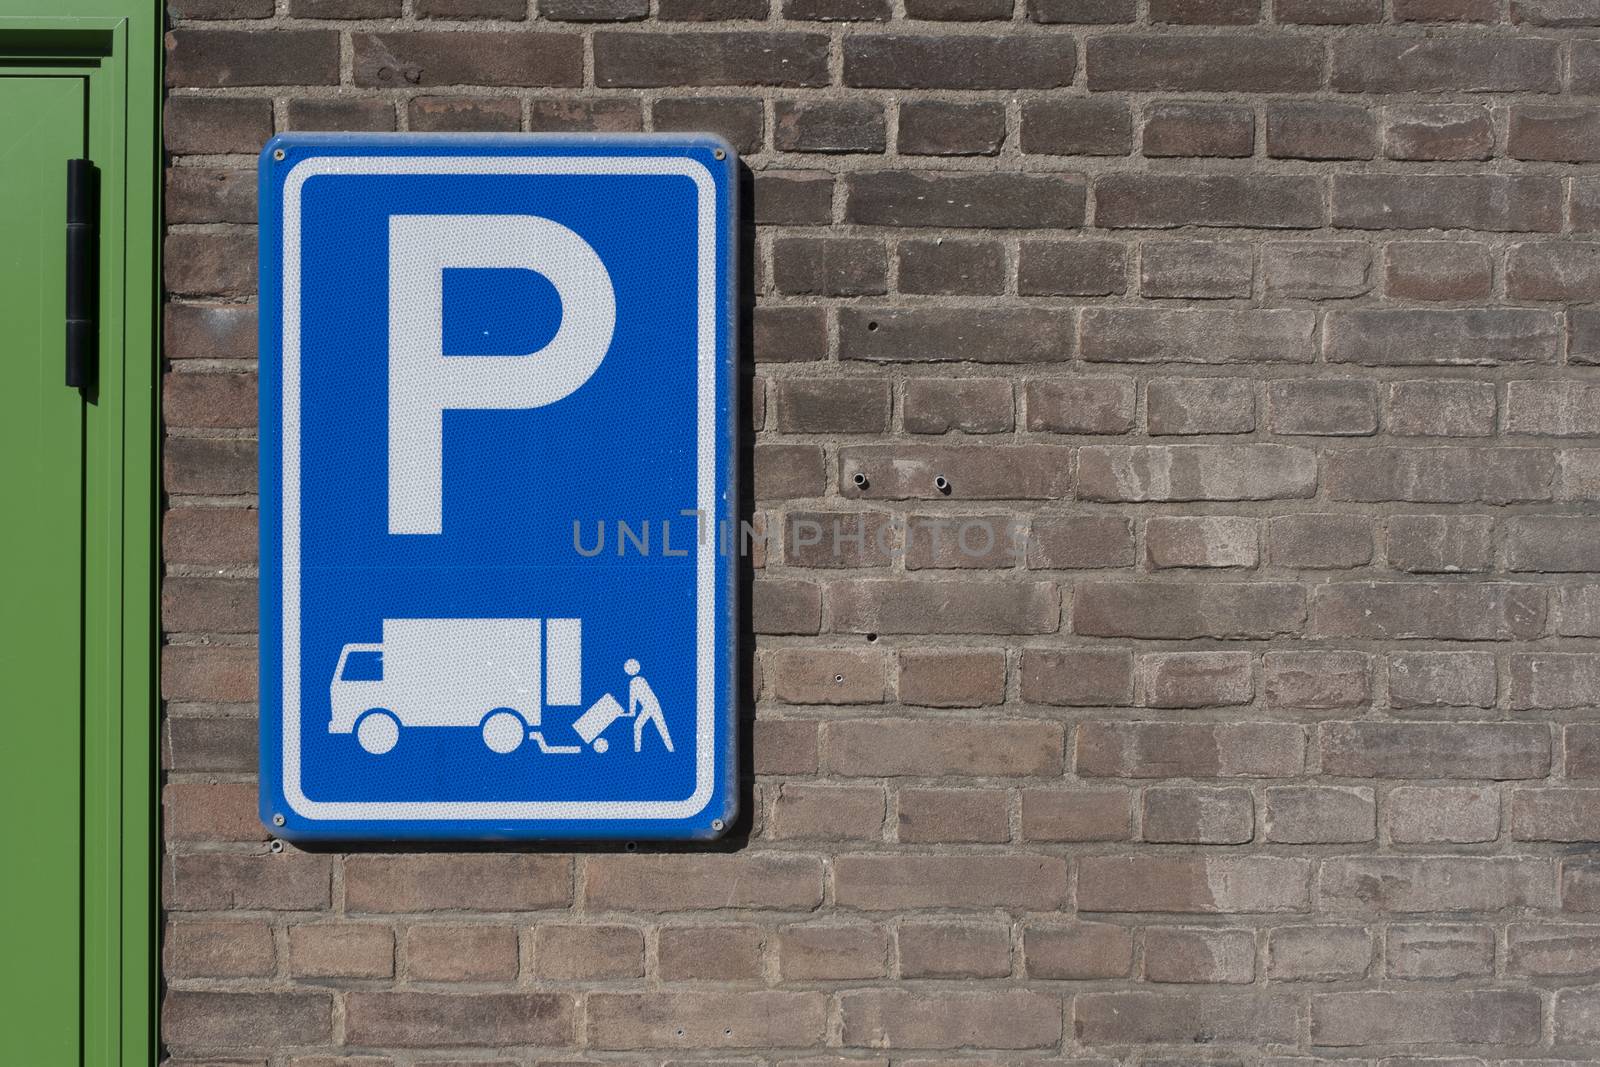 parking permitted for the immediate loading and unloading of goo by Tjeerdkruse